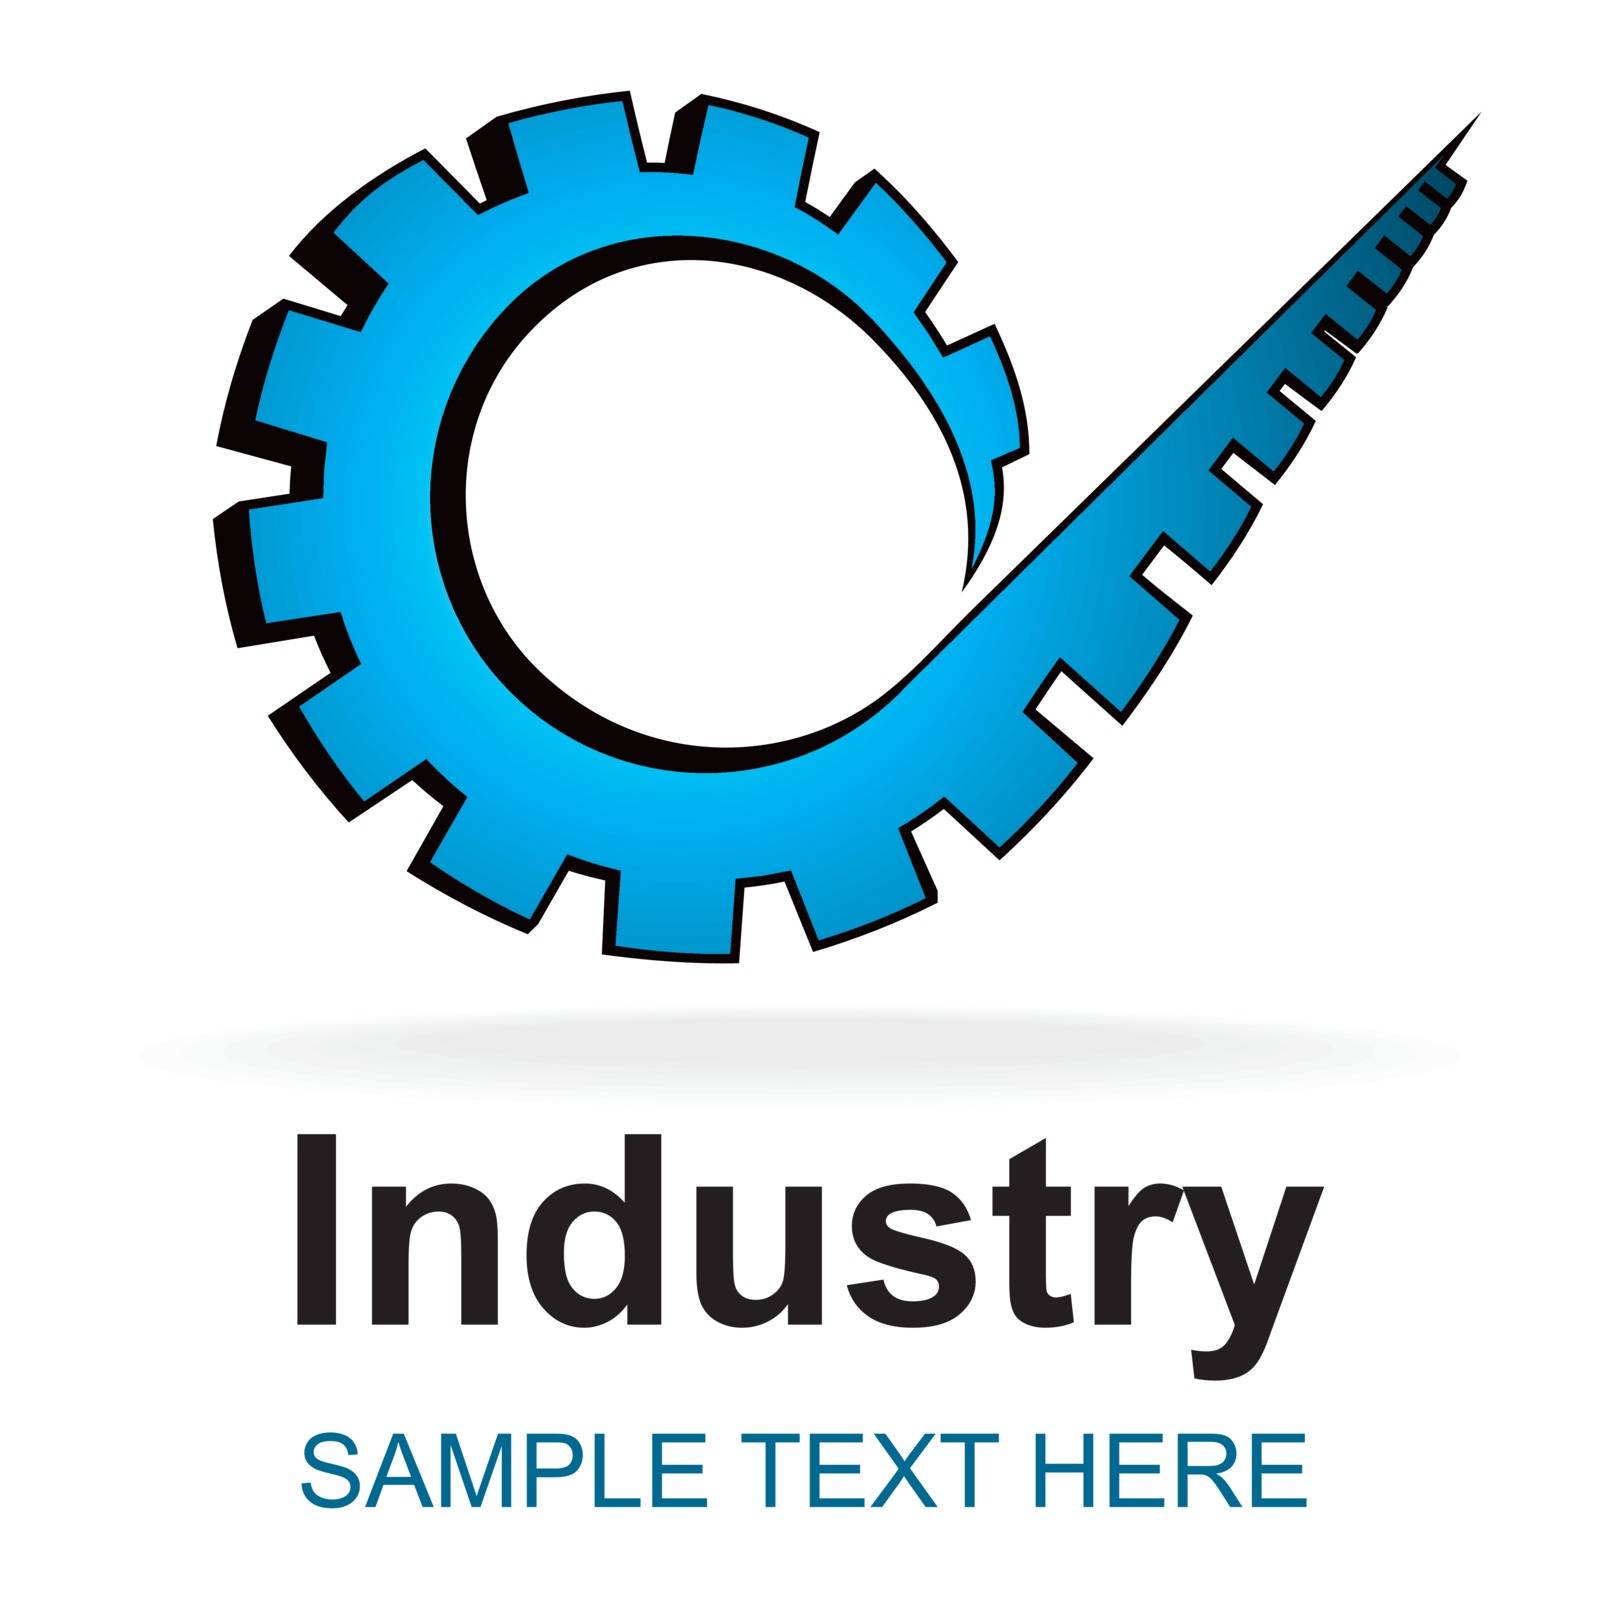 Industry icon by oxygen64